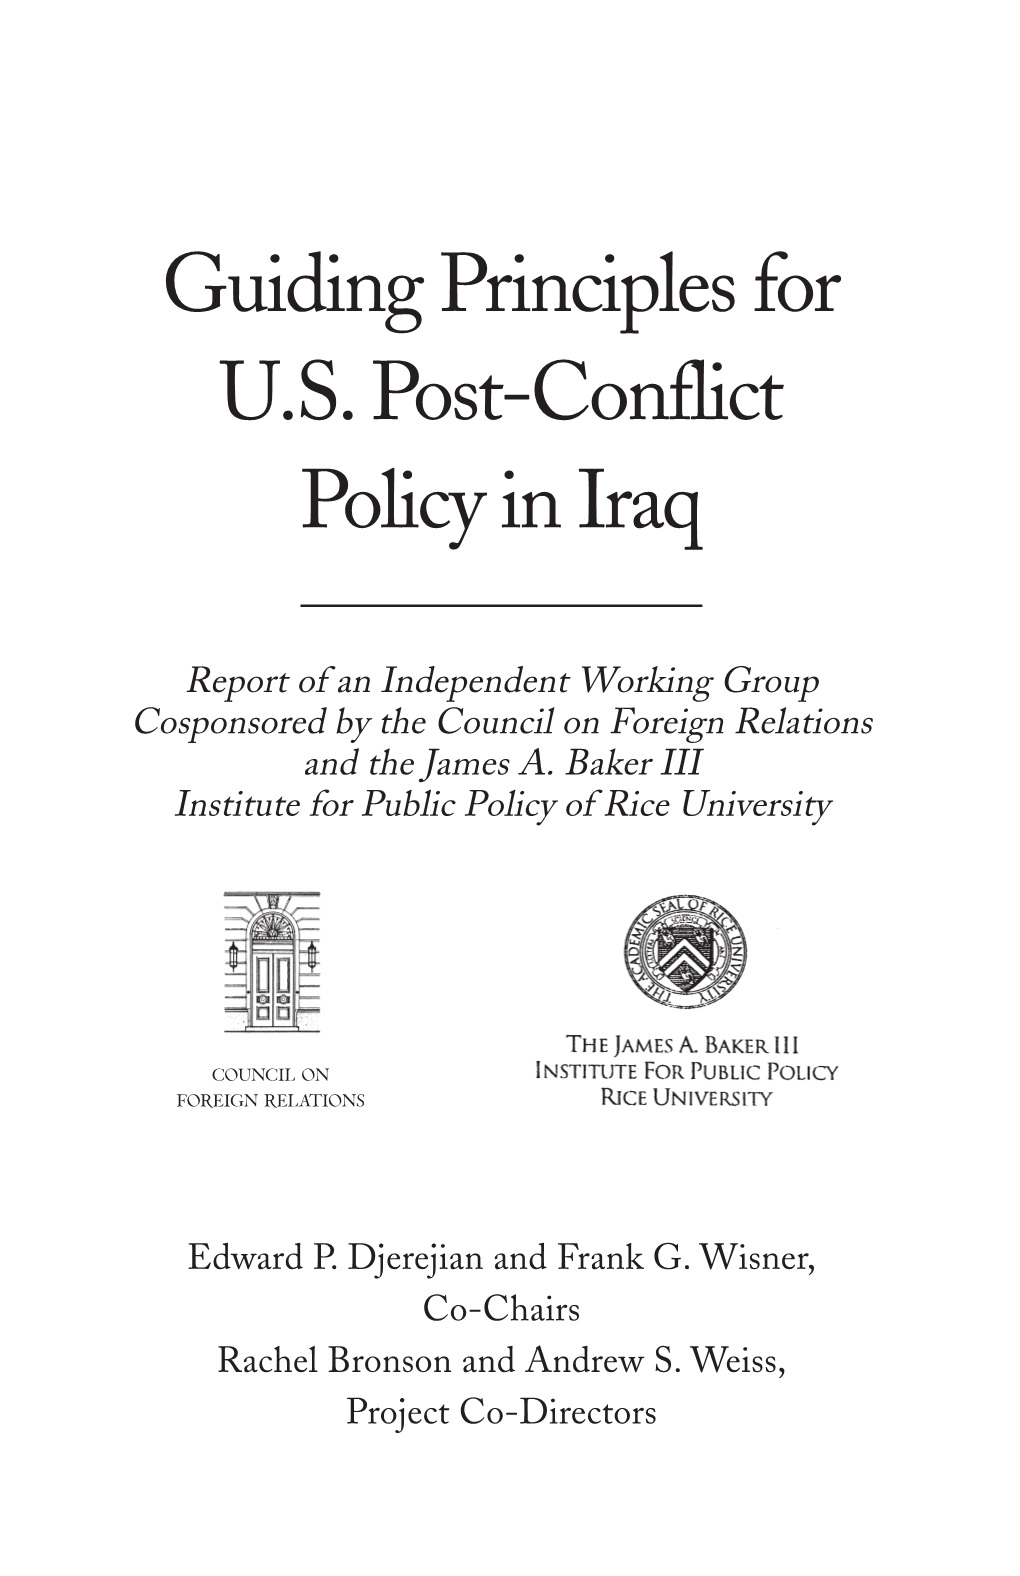 Guiding Principles for U.S. Post-Conflict Policy in Iraq